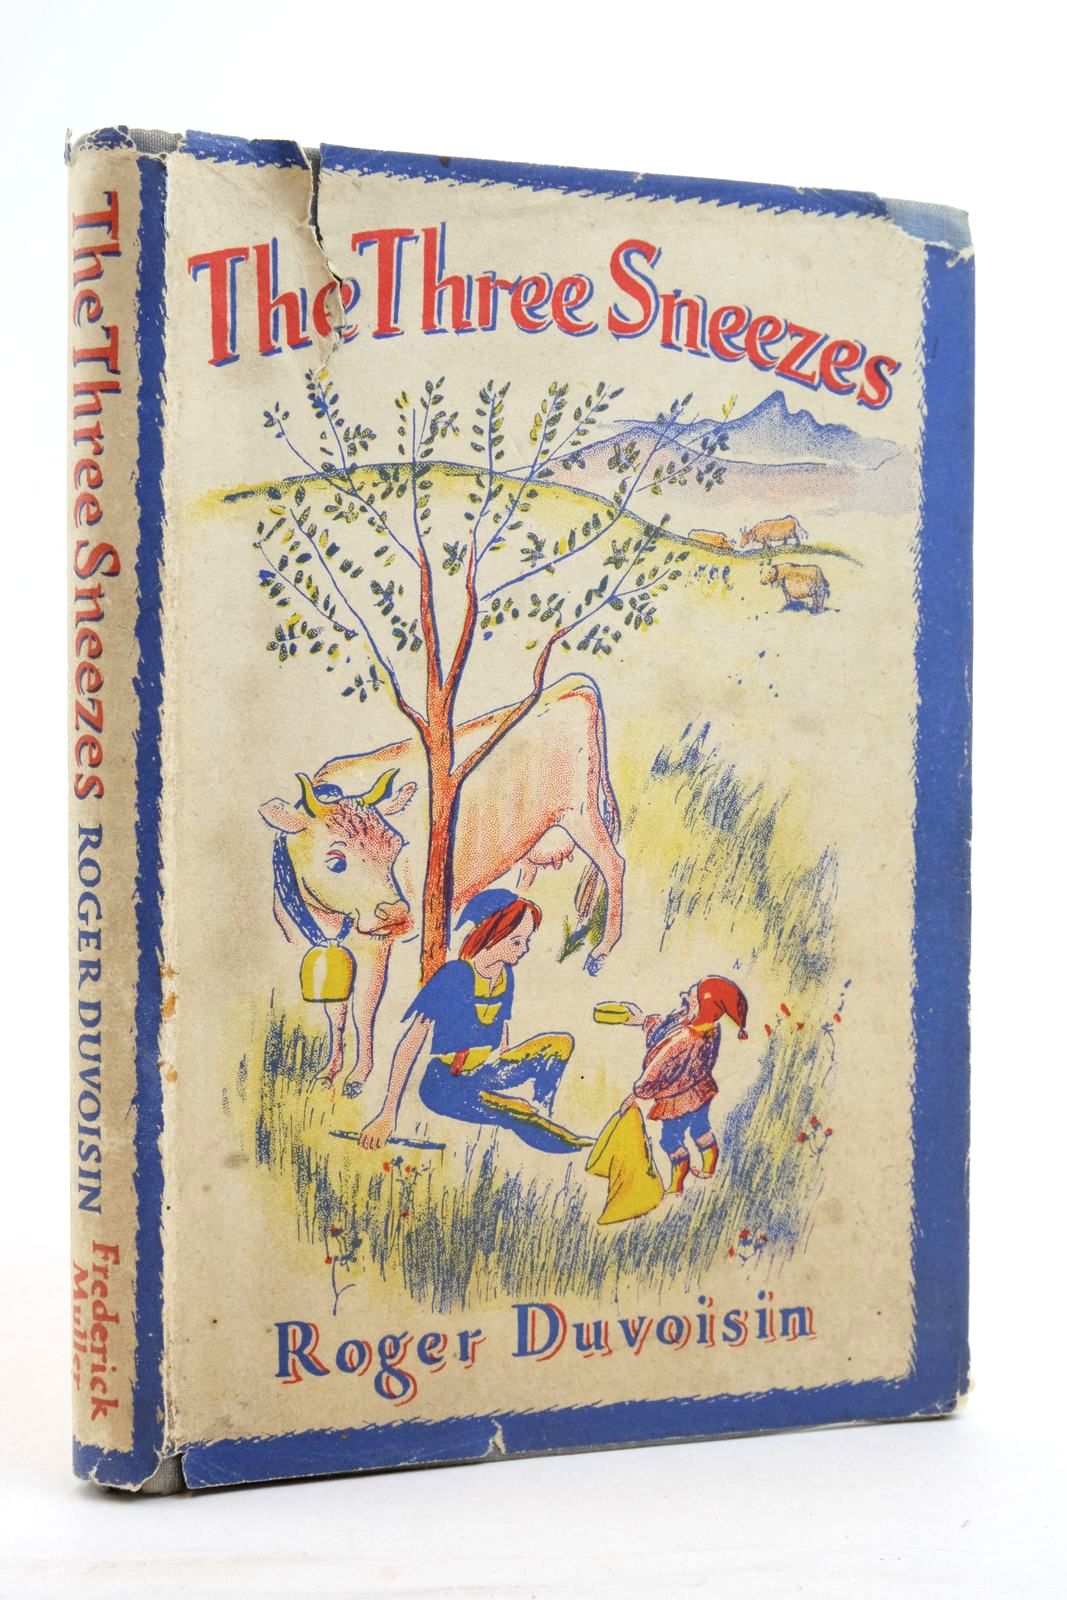 Photo of THE THREE SNEEZES AND OTHER SWISS TALES written by Duvoisin, Roger illustrated by Duvoisin, Roger published by Frederick Muller Limited (STOCK CODE: 2137231)  for sale by Stella & Rose's Books